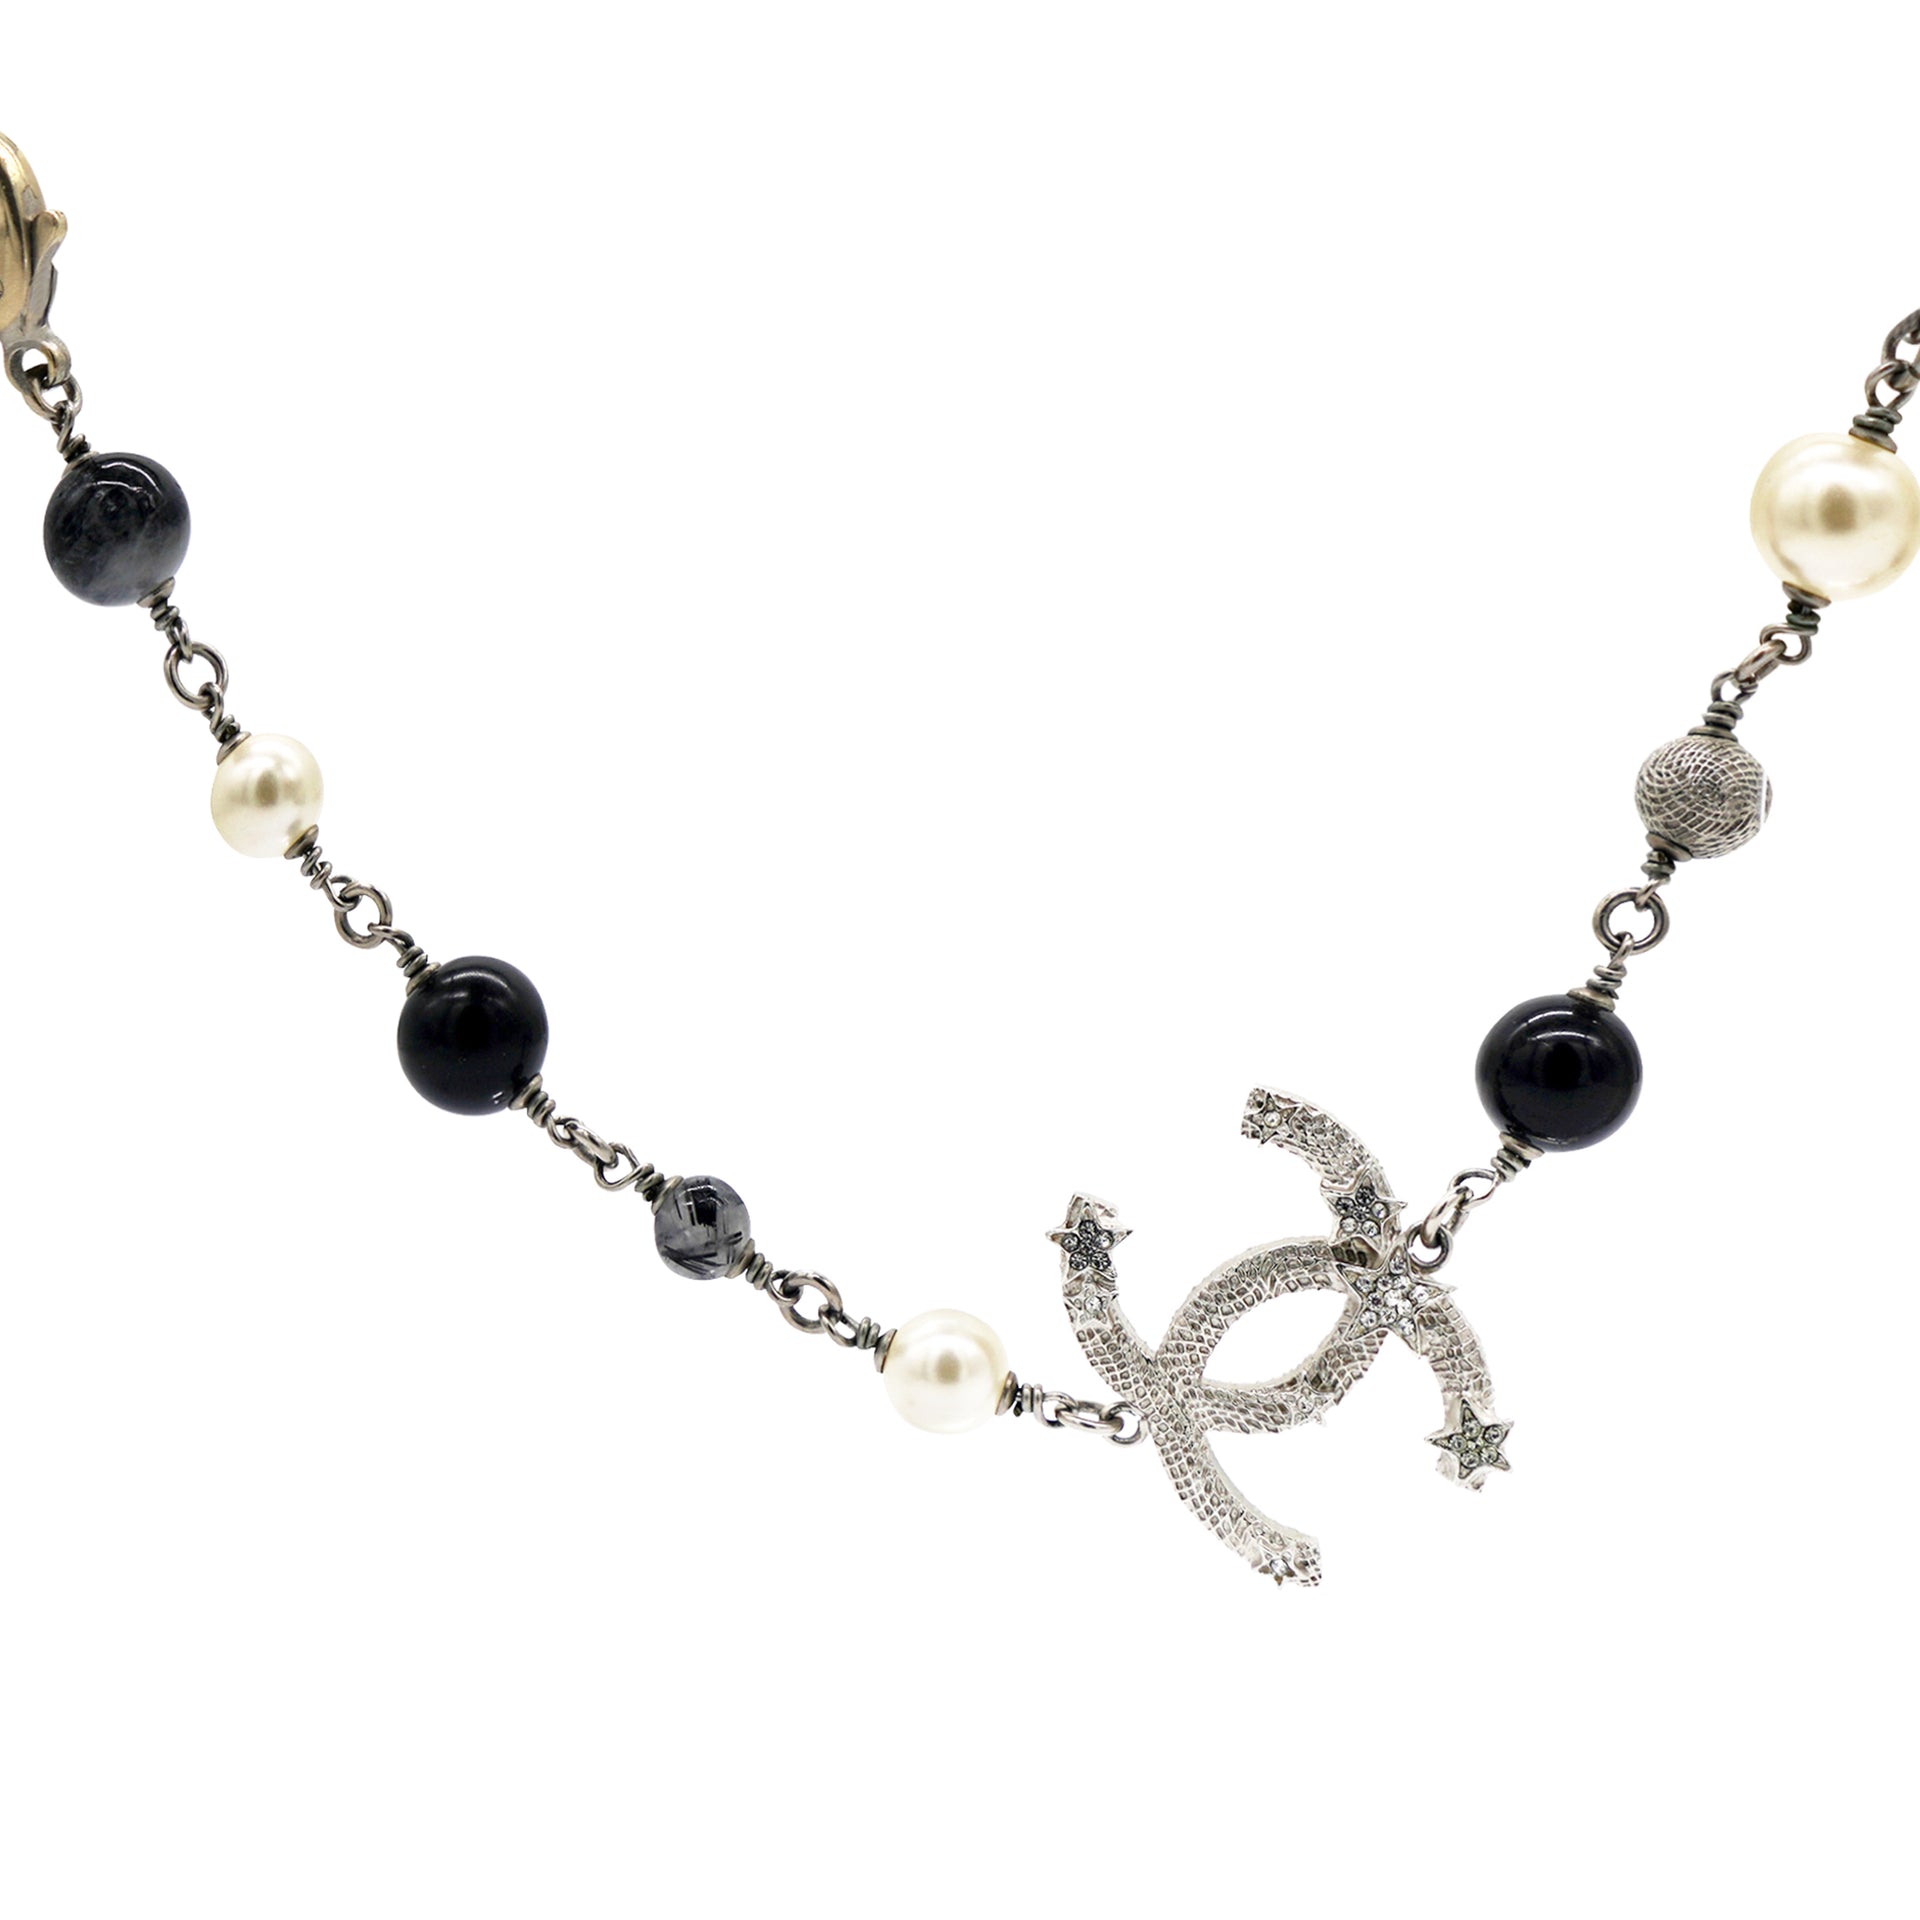 White Imitation Pearl, Black Bead and Silver Metal CC Station Necklace, 2013